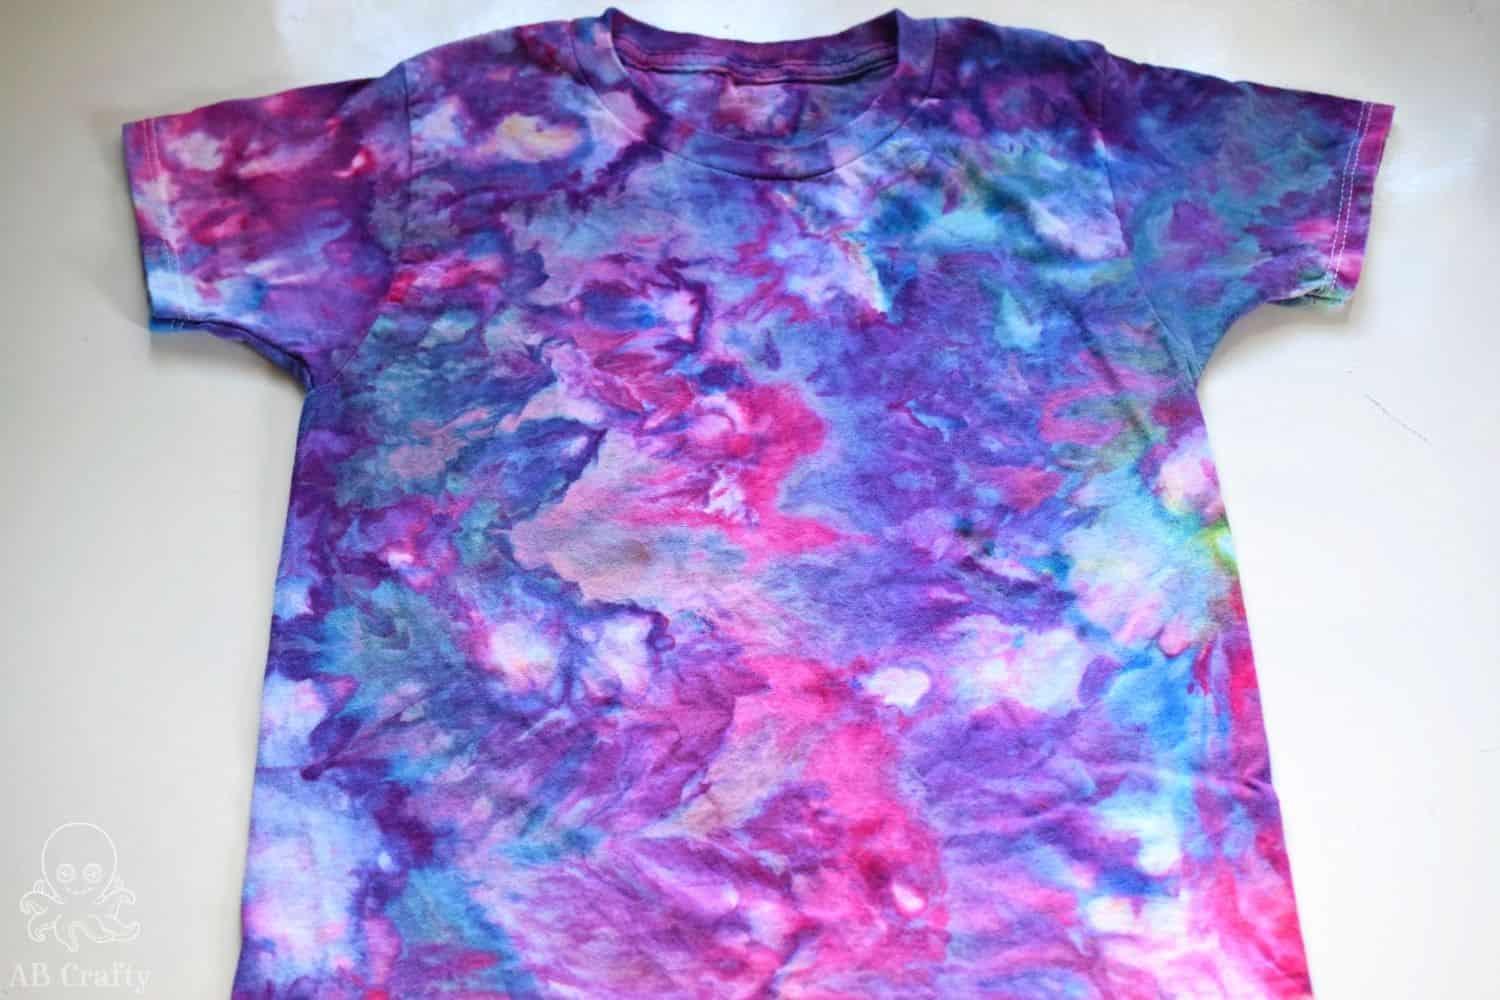 Using Ice for Tie Dye